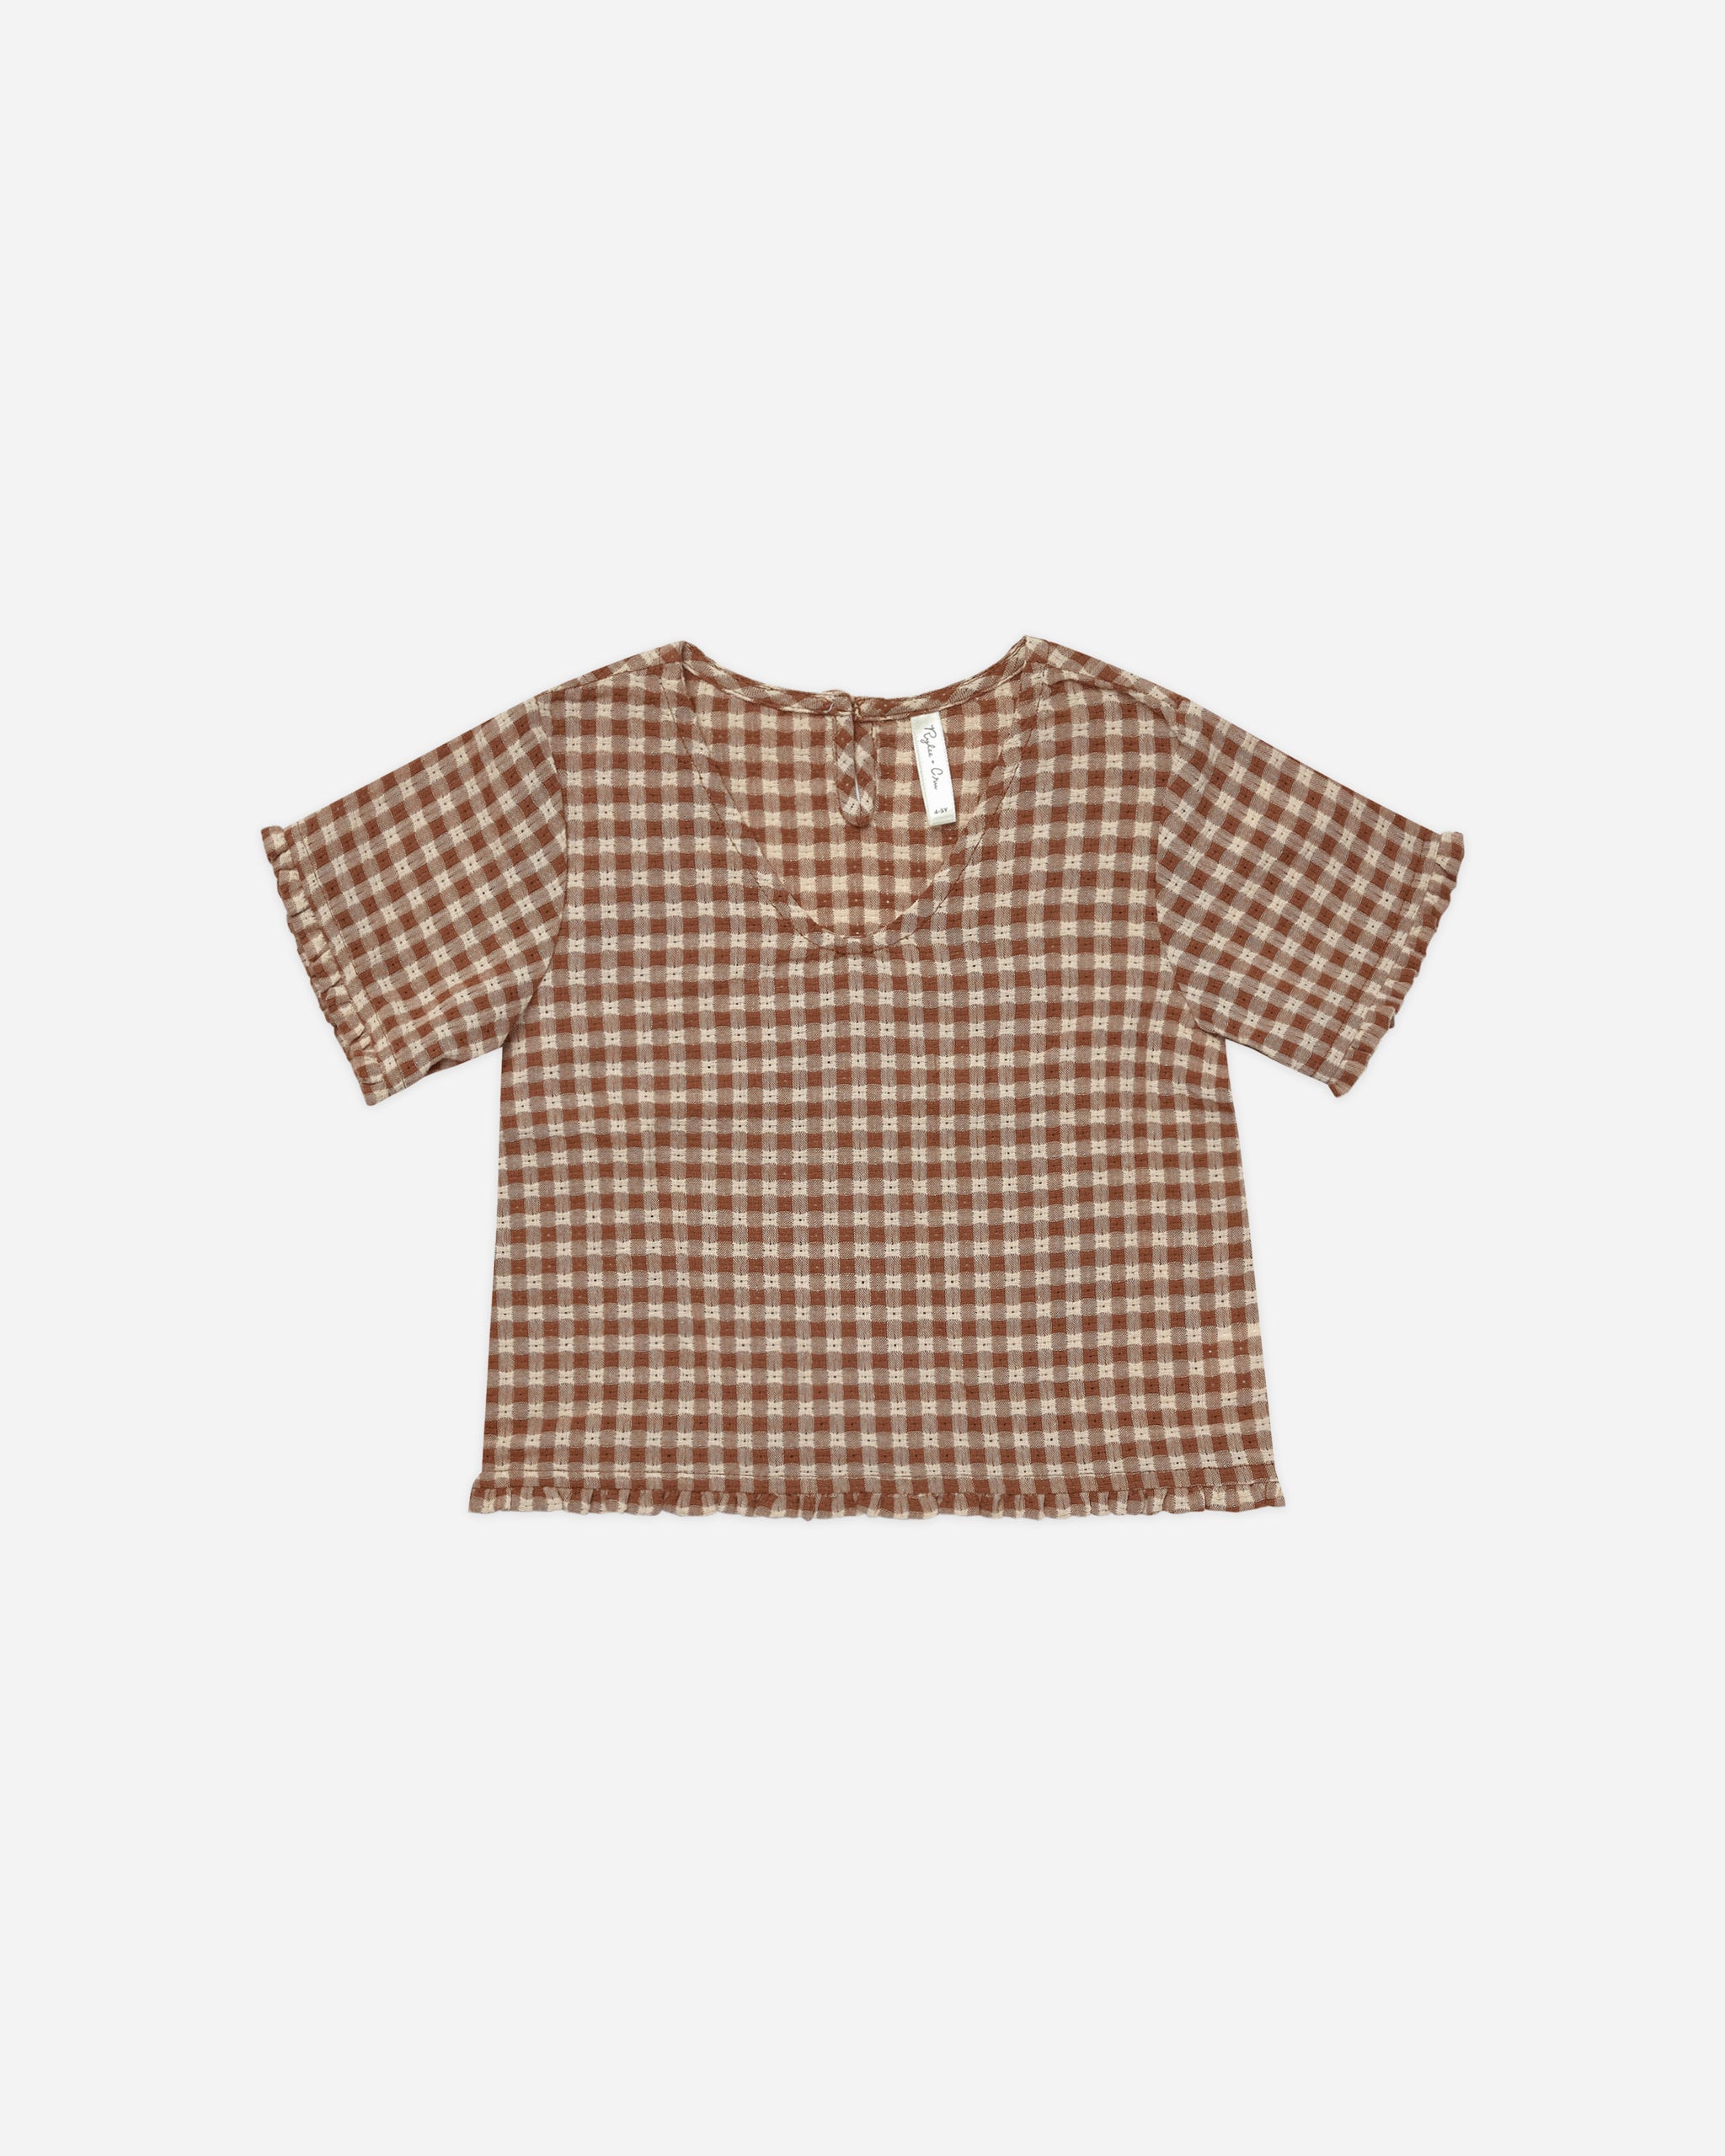 Rory Top || Brown Gingham - Rylee + Cru | Kids Clothes | Trendy Baby Clothes | Modern Infant Outfits |